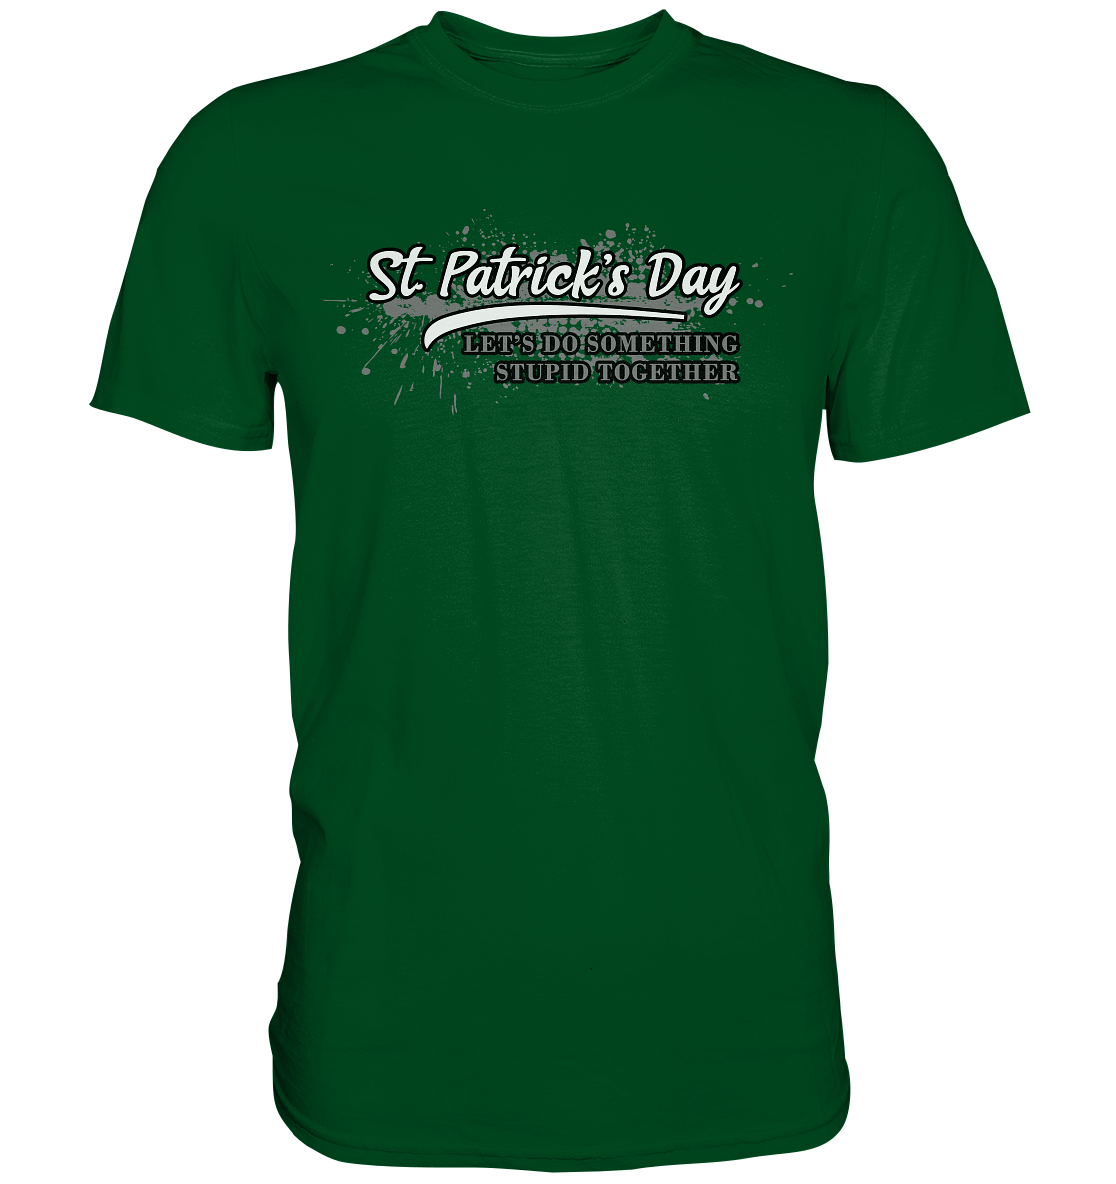 St. Patrick's Day "Let's Do Something Stupid Together" - Premium Shirt